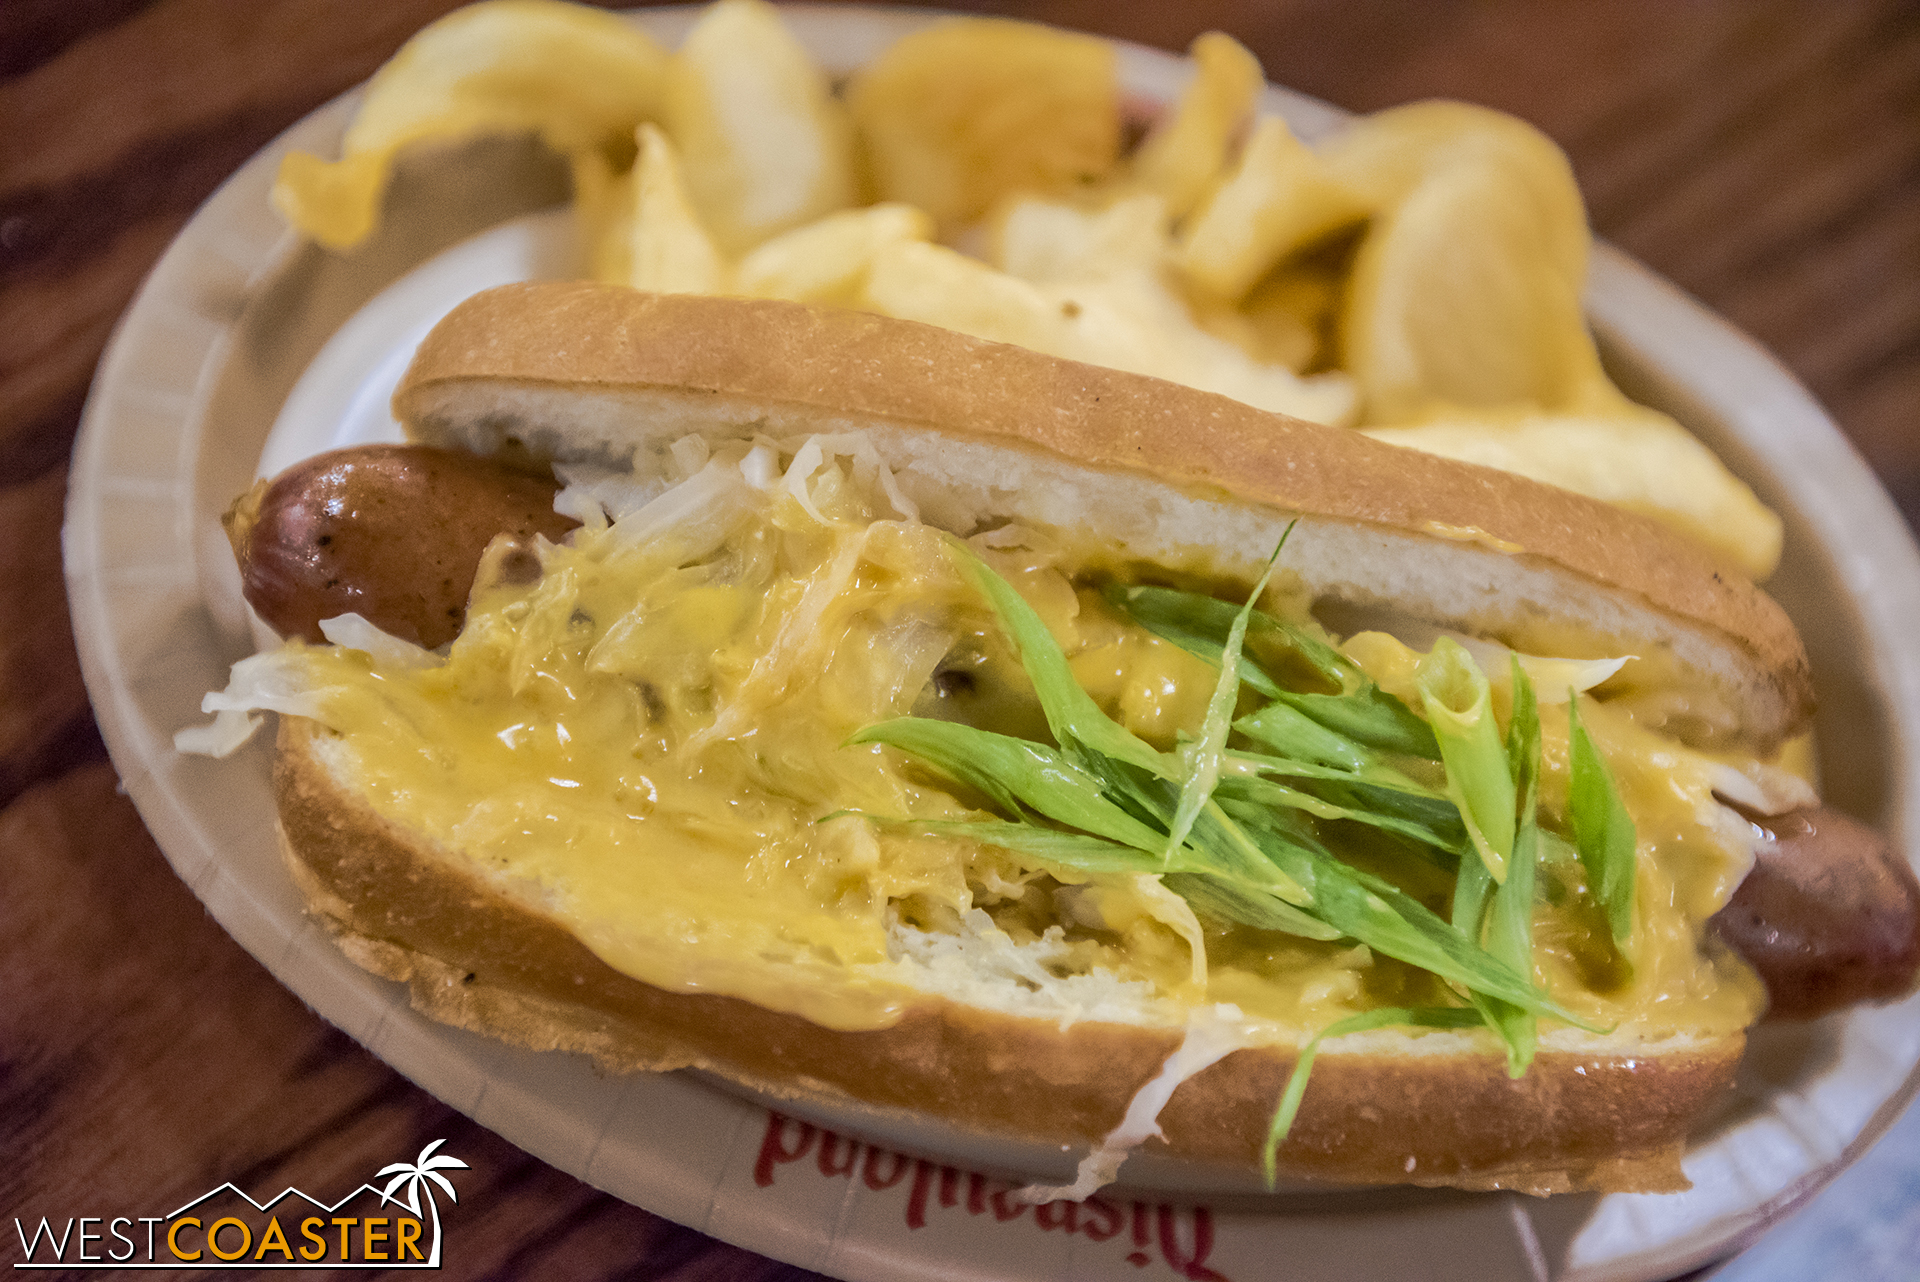  Award Wieners has the Oktoberfest Dog—kielbasa sausage topped with caramelized onions, sauerkraut, Oktoberfest beer cheese, and green onions.  The sausage is pretty flavorful, and the beer cheese pretty tasty.  It’s a good dog, but not amazing. 